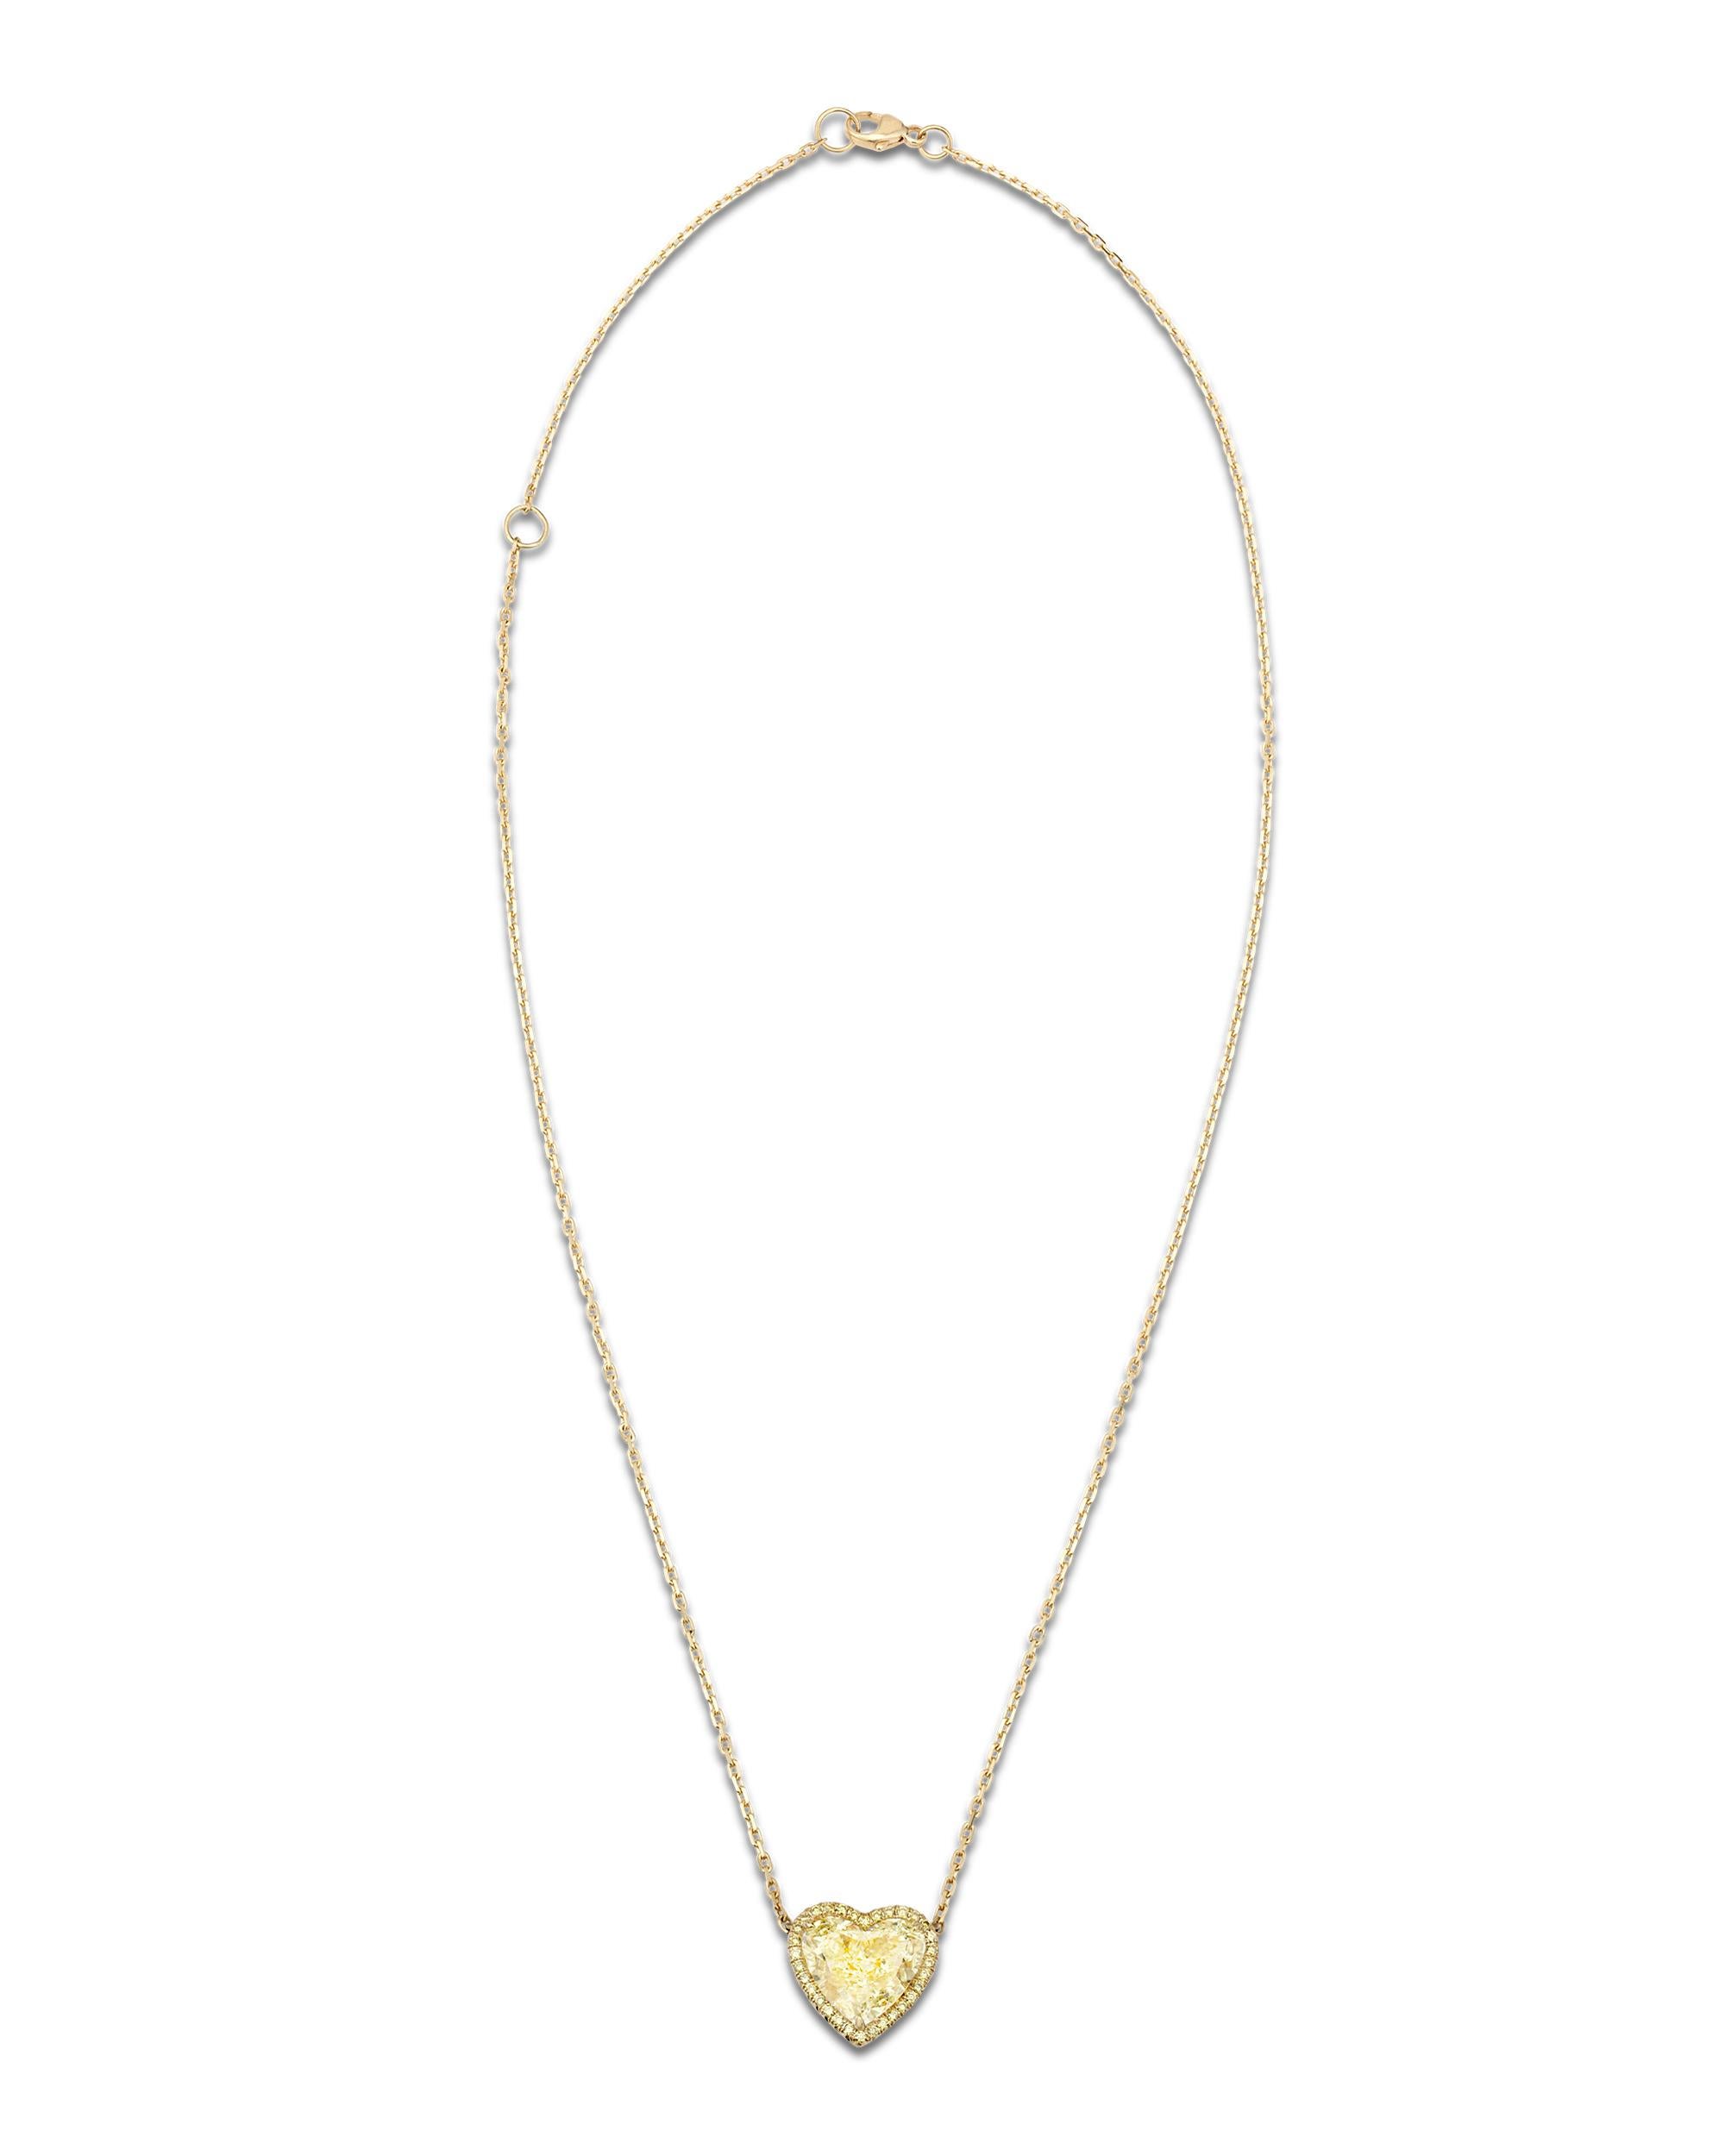 The rarity and beauty of an untreated fancy colored diamond is seldom matched in the realm of precious gemstones. The absolutely dazzling 2.61-carat natural fancy light yellow diamond suspended from this necklace is a spectacular example of these